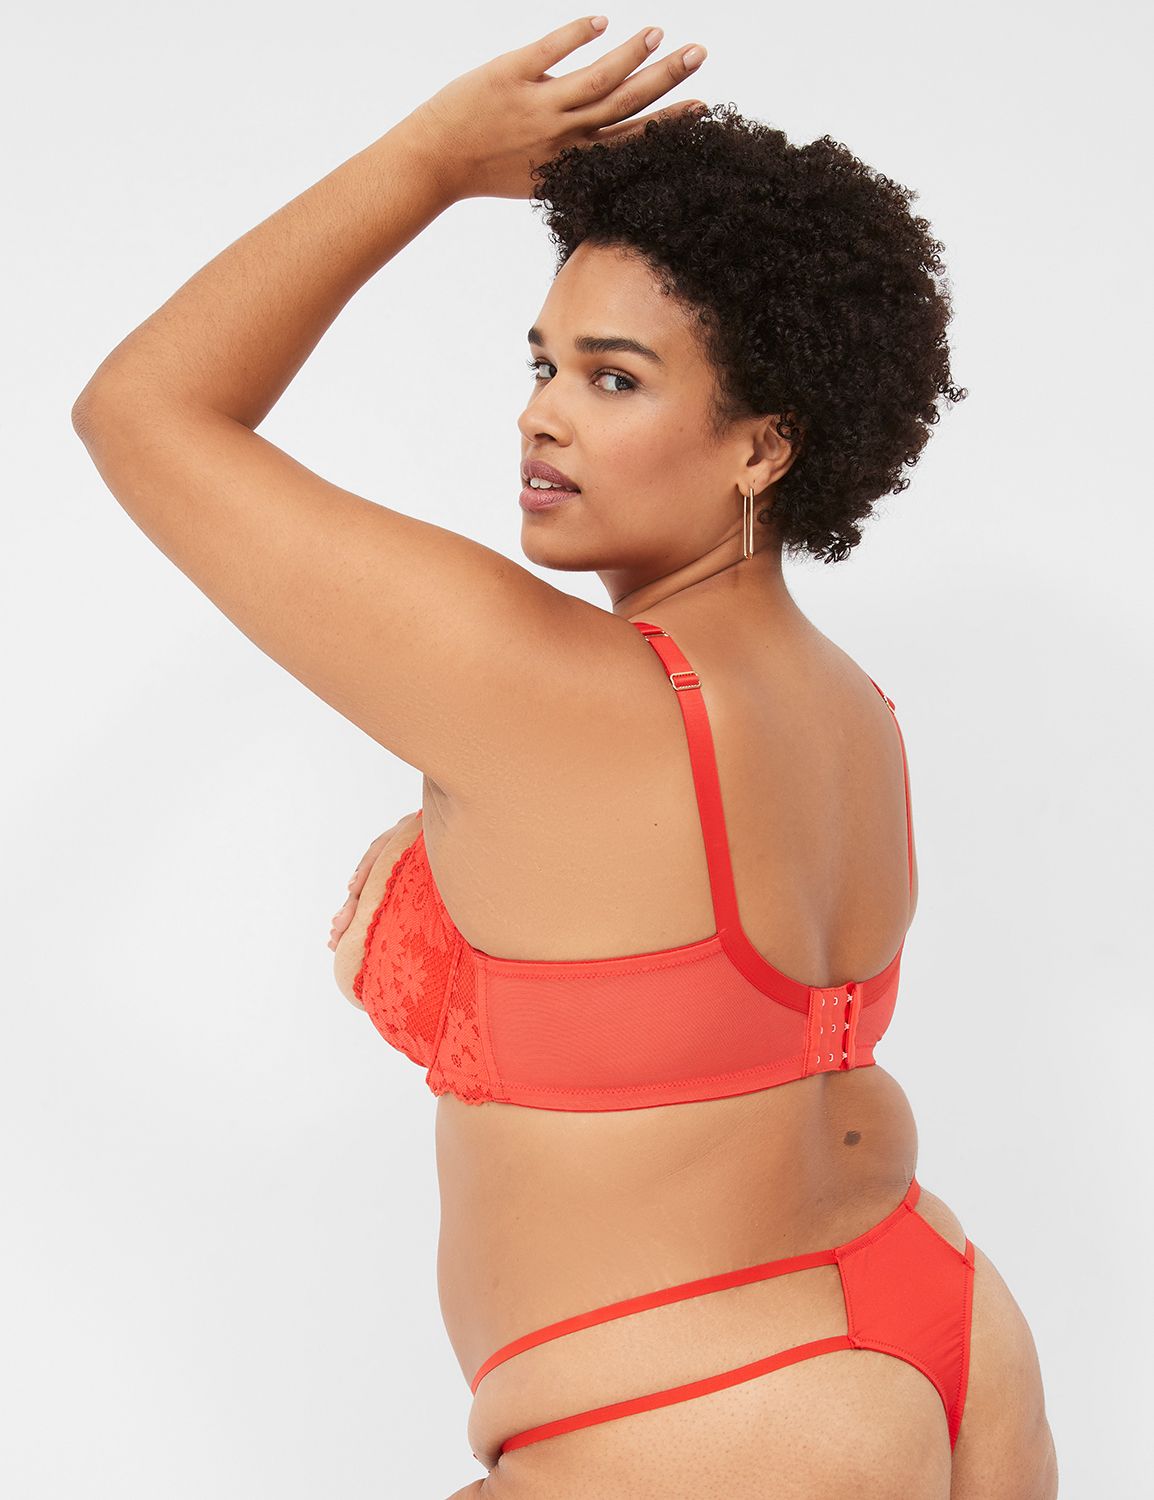 Classic Sexy Puro Simples sexy Lingerie Sexy Plus Size